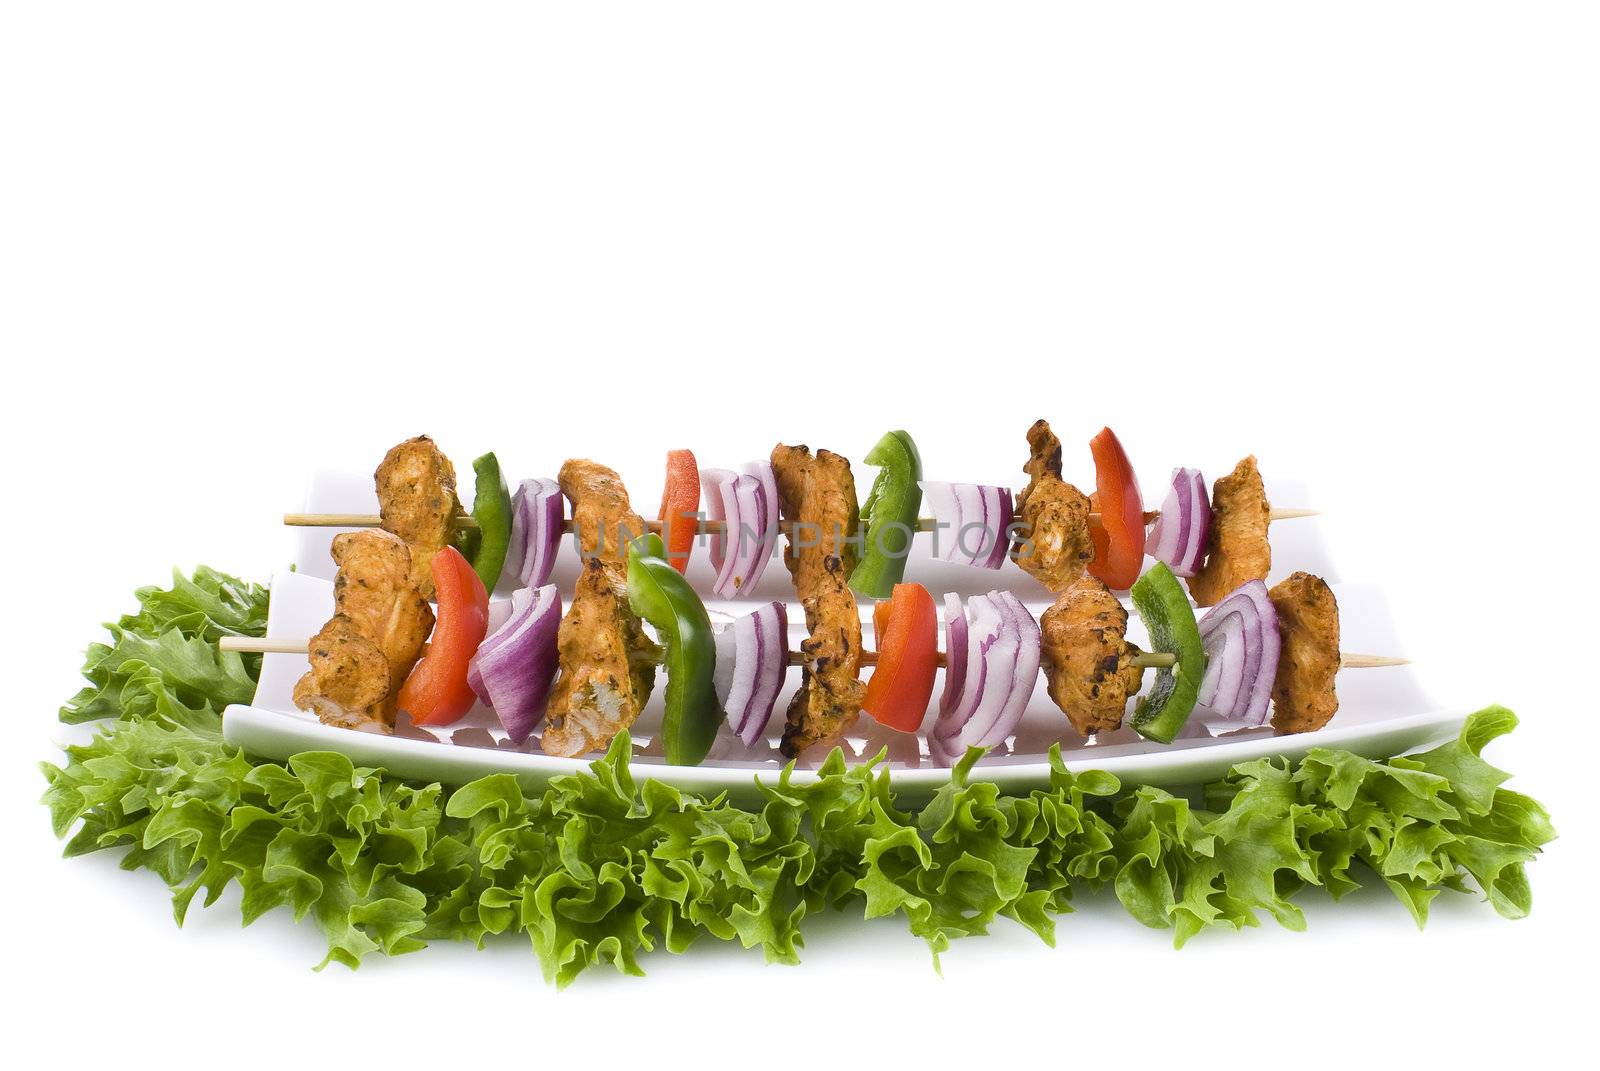 Skewers with chicken and vegetables on the plate - isolated